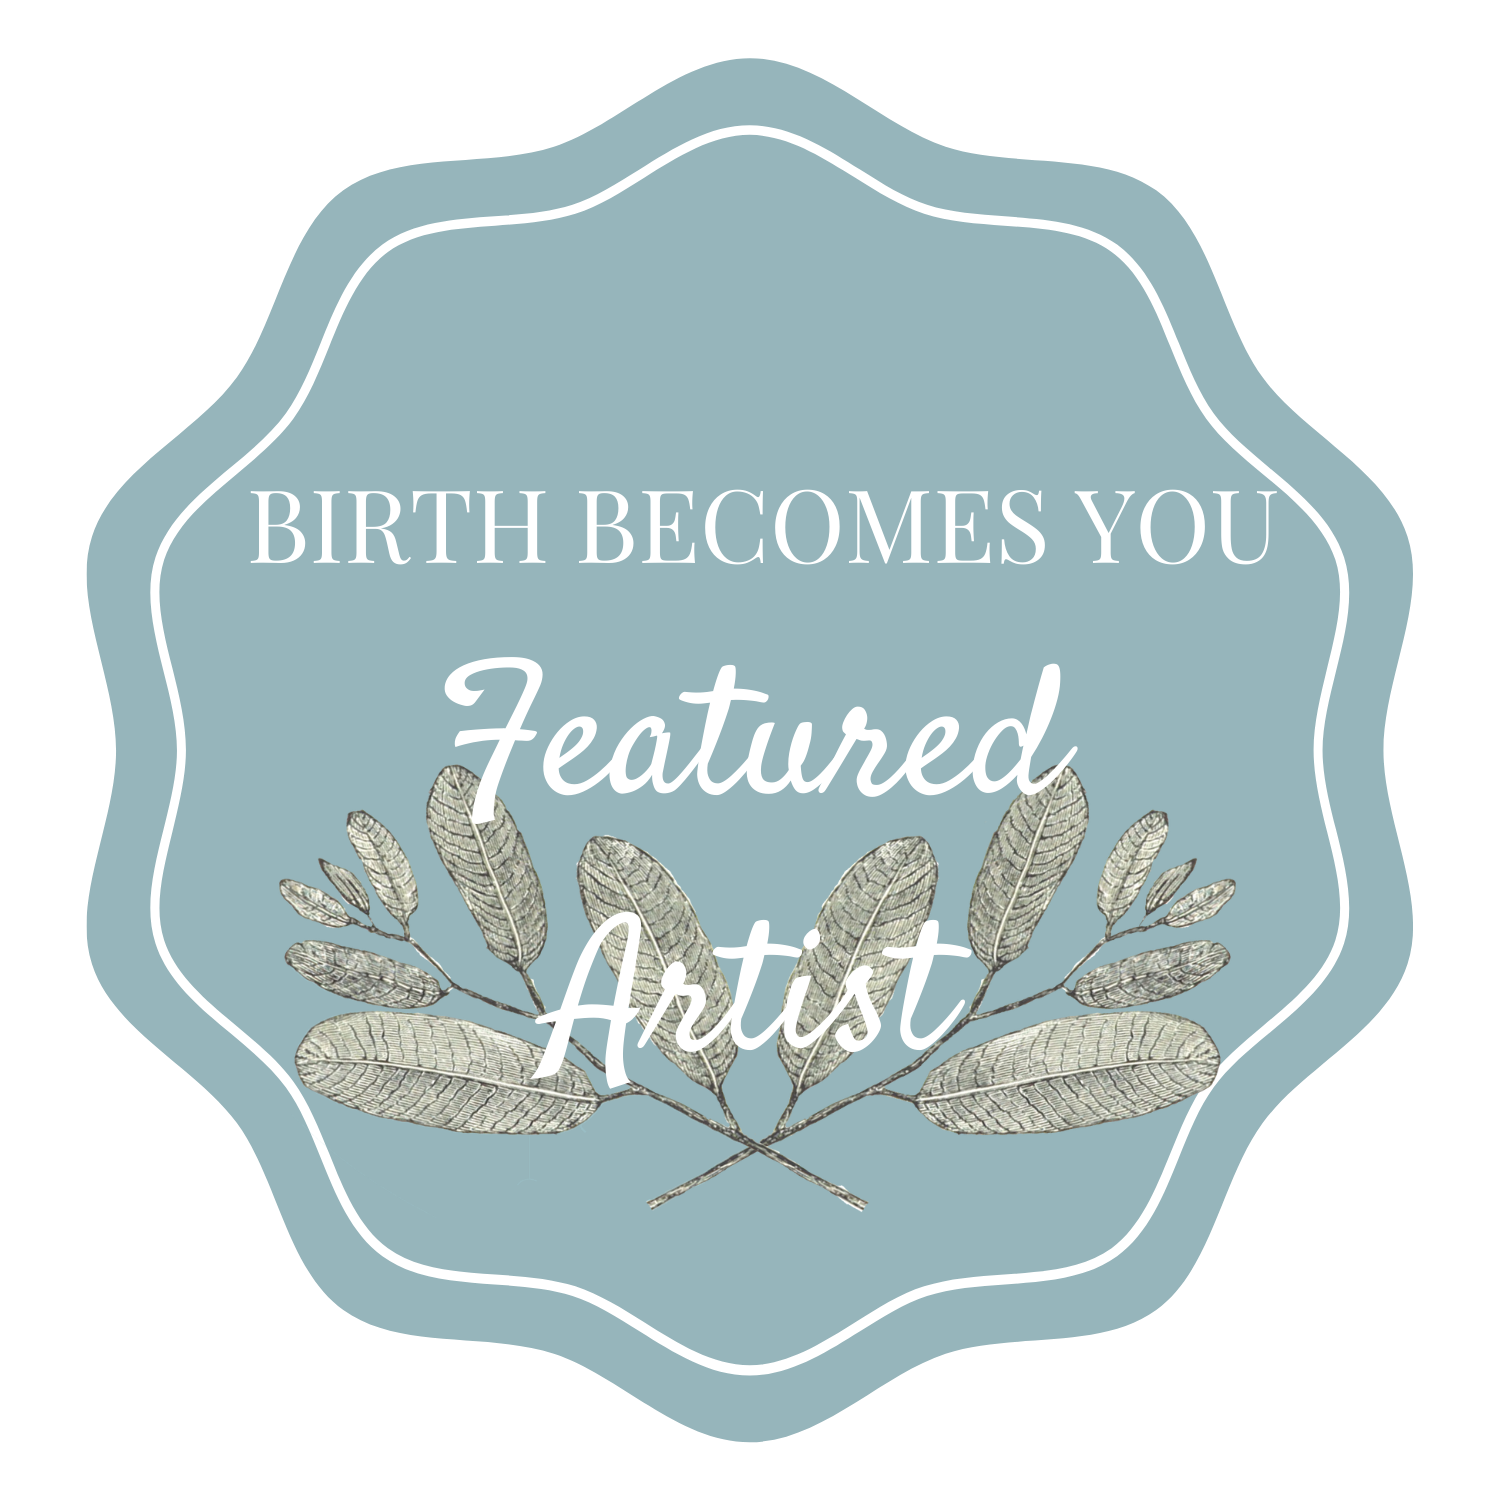 Featured Artist on Birth Becomes Her website